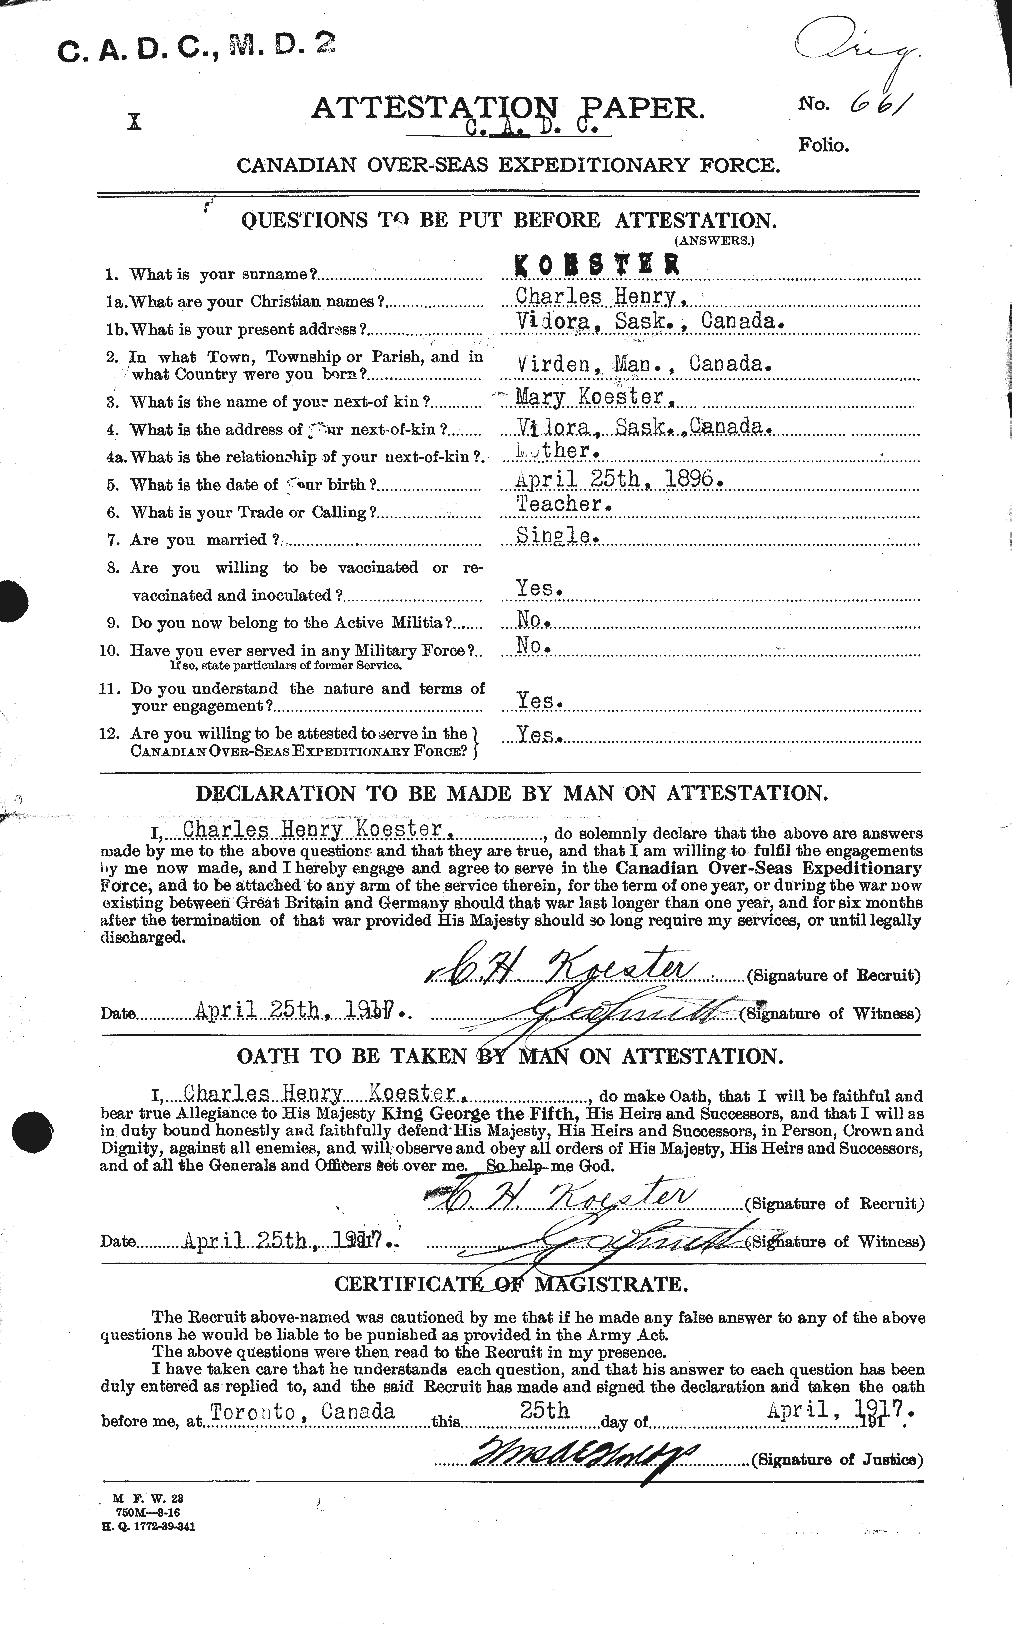 Personnel Records of the First World War - CEF 439755a